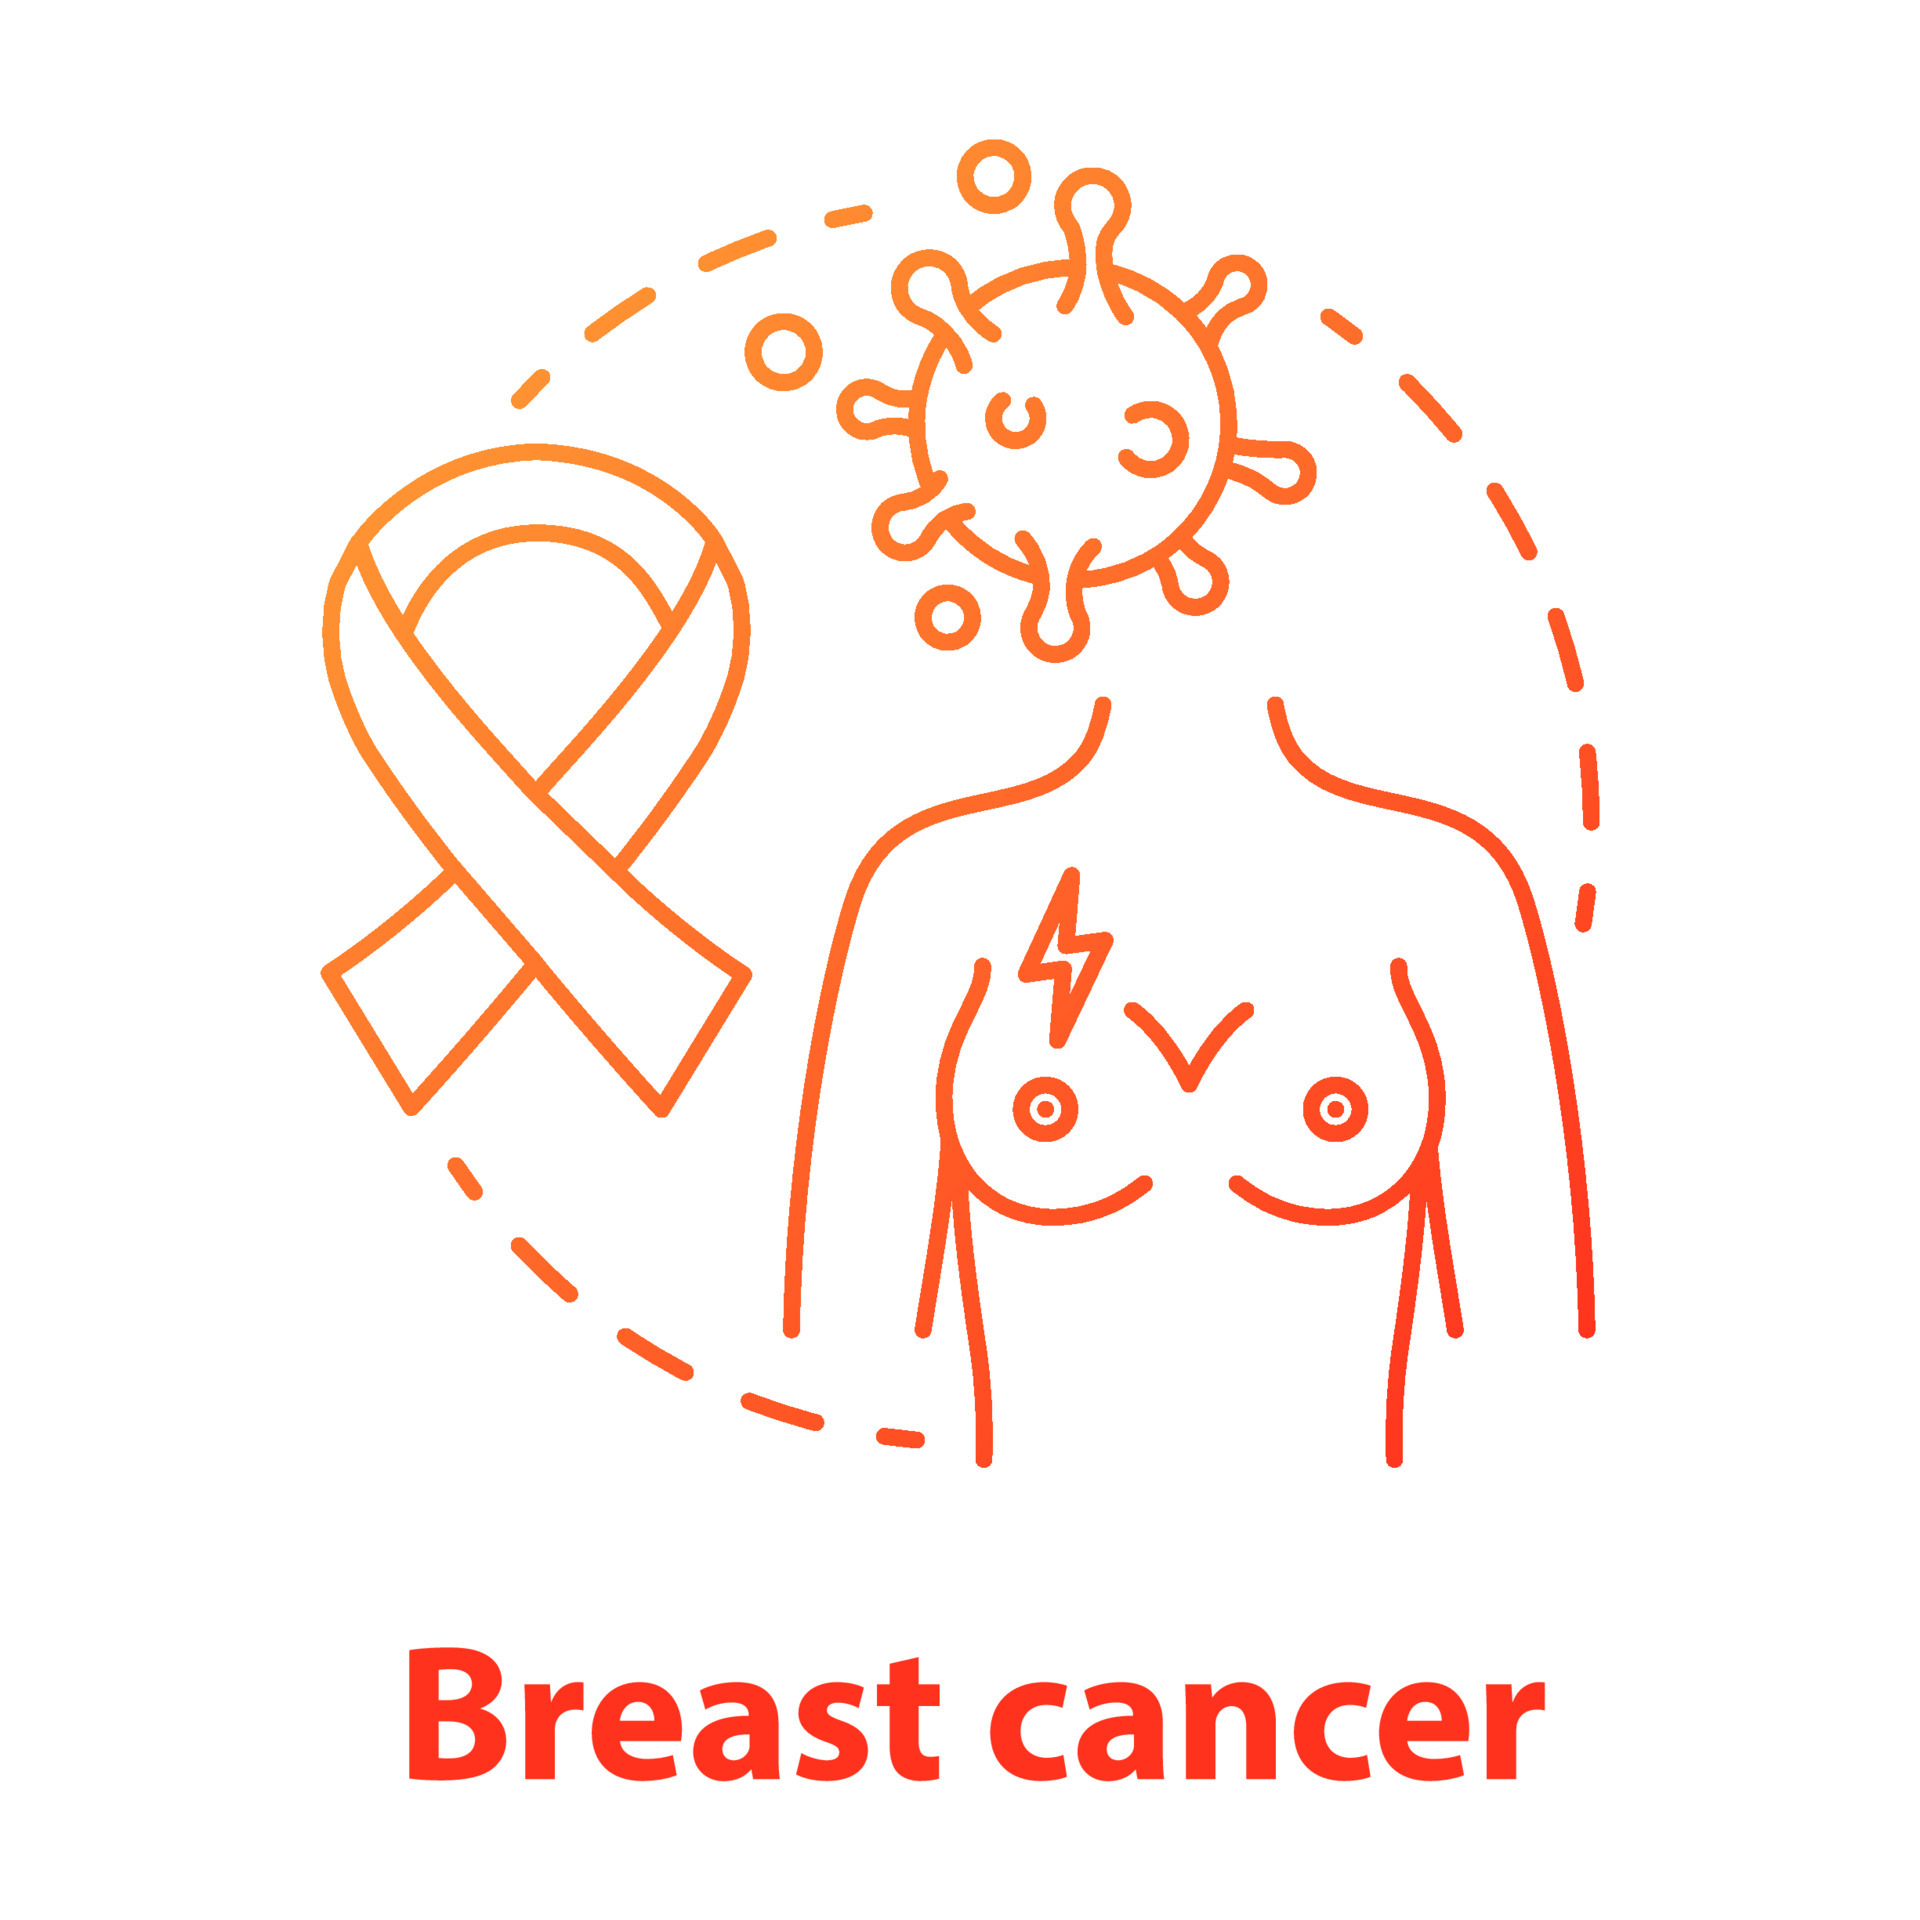 https://static.vecteezy.com/system/resources/previews/004/191/113/original/breast-cancer-red-gradient-concept-icon-oncological-disease-idea-thin-line-illustration-women-healthcare-ribbon-awareness-month-tissue-carcinoma-isolated-outline-drawing-vector.jpg